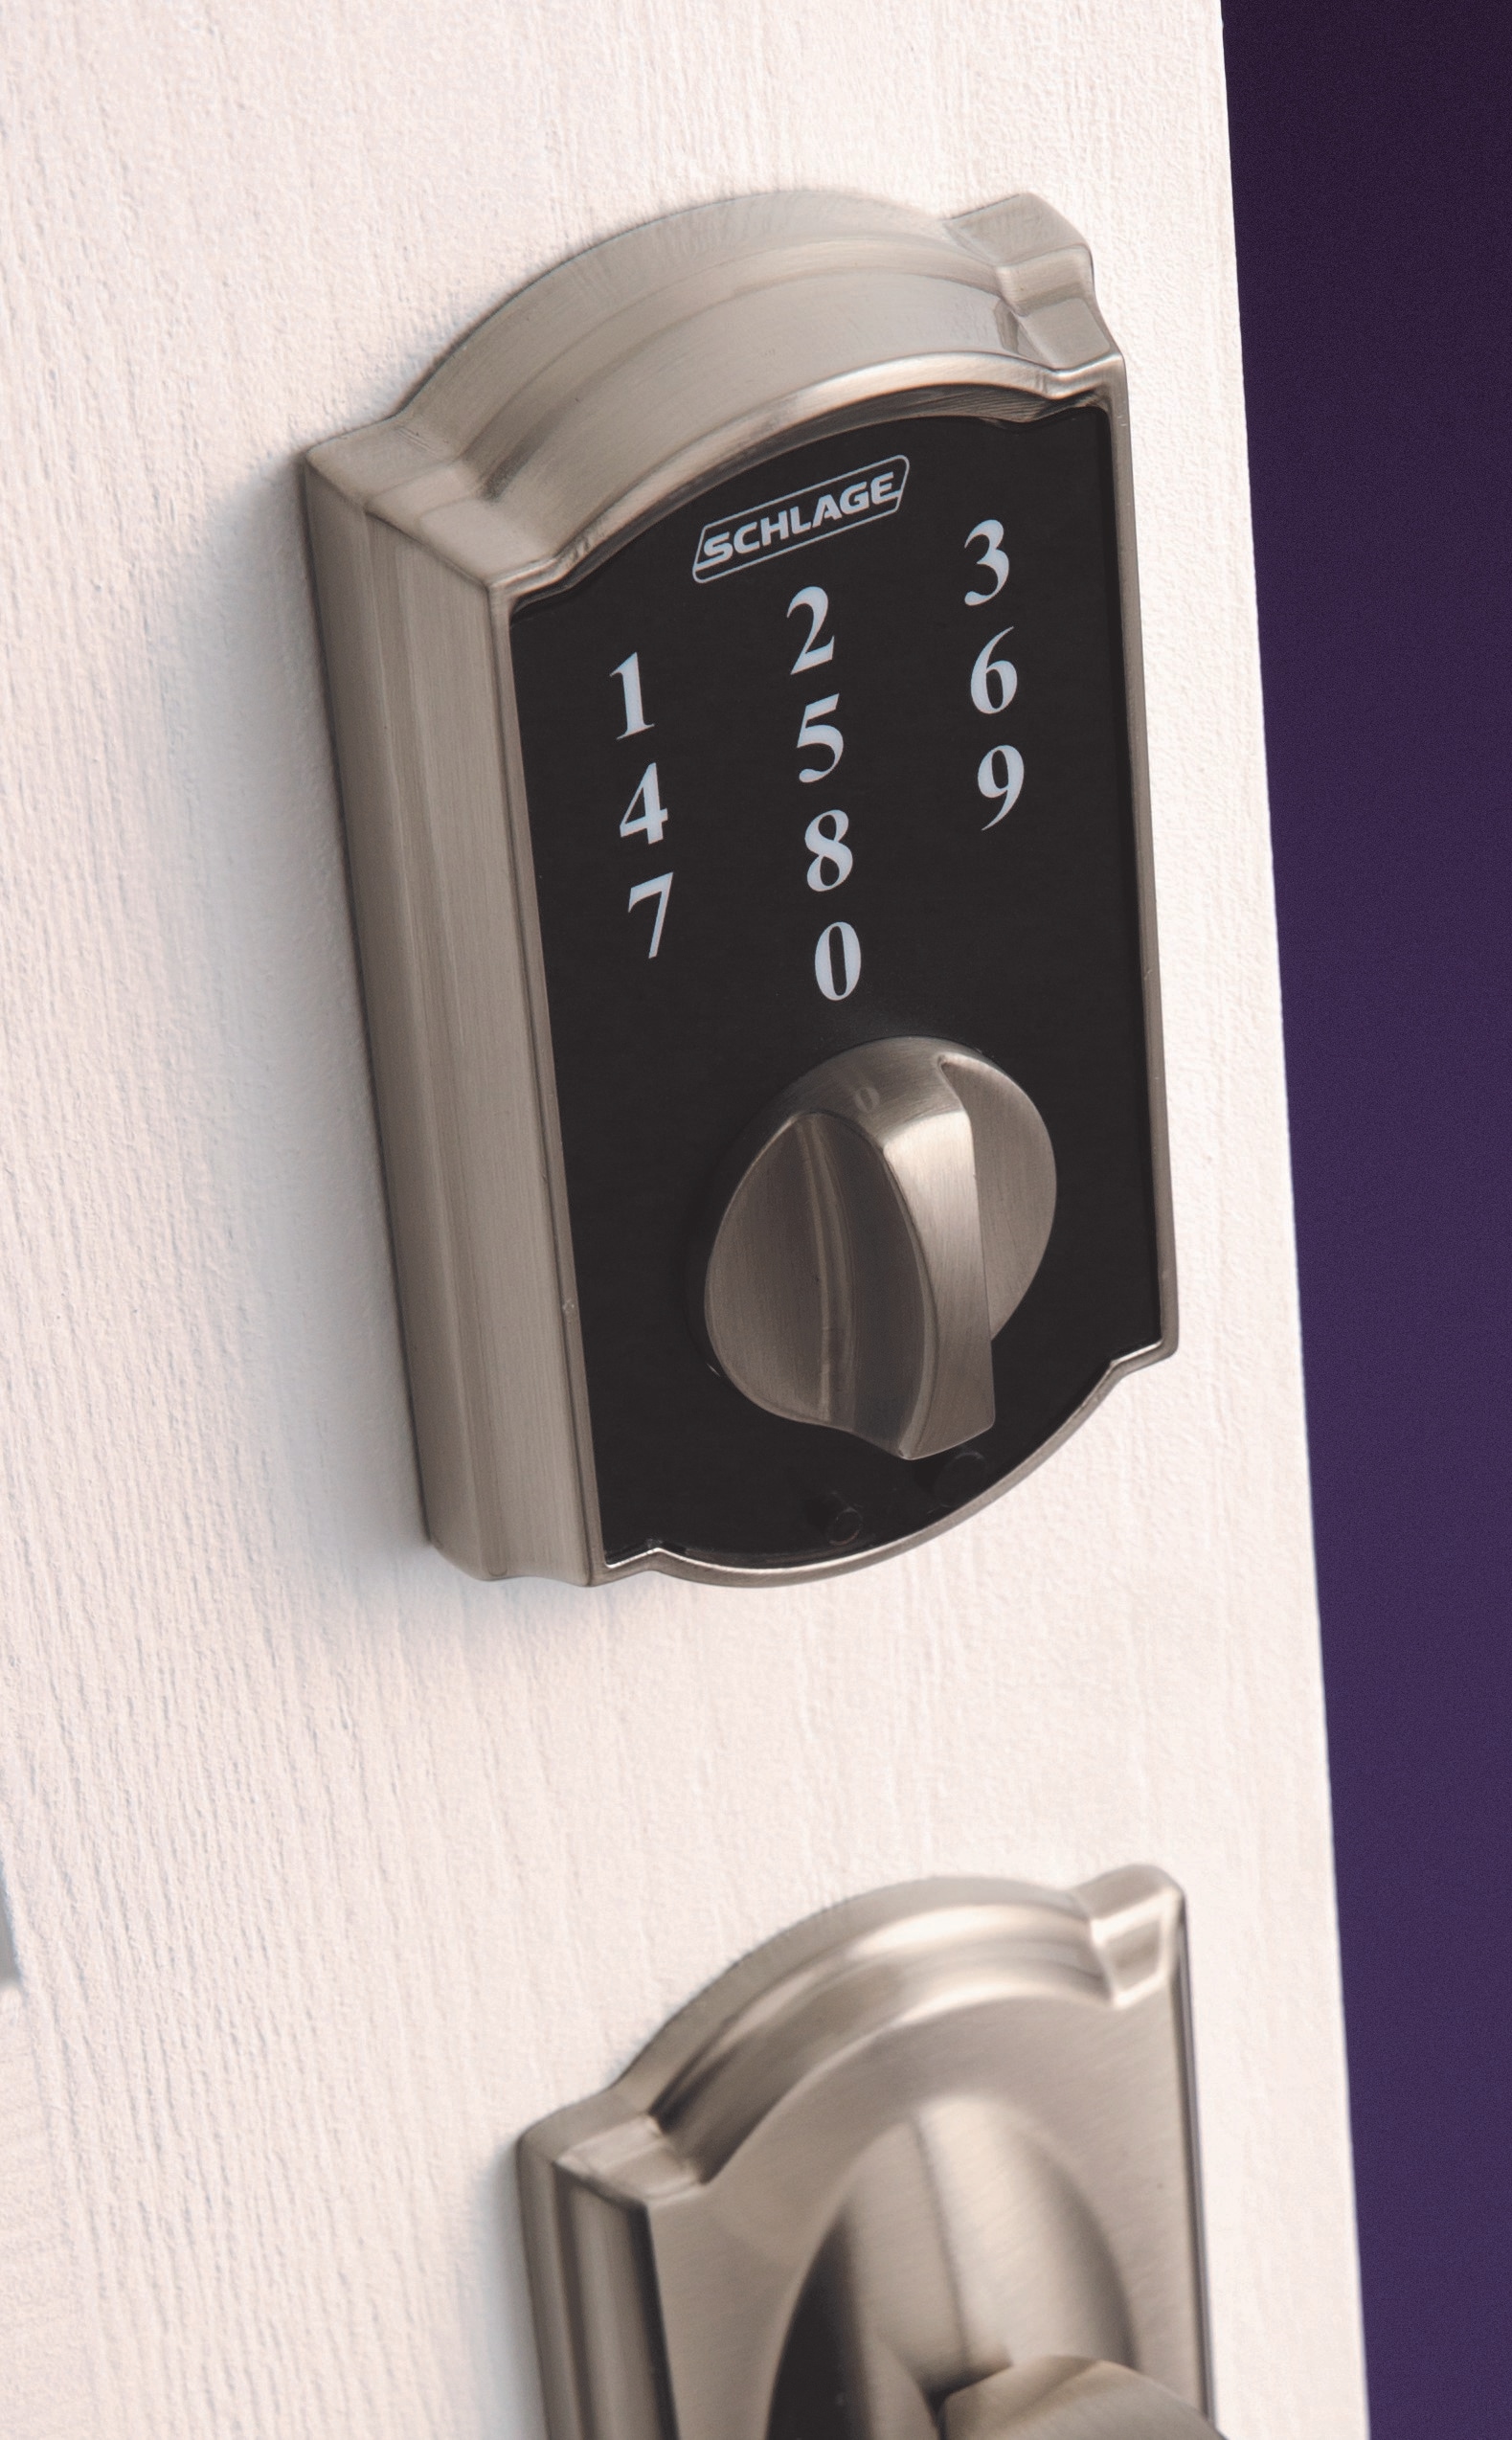 Schlage Touch Camelot Satin Nickel Electronic Deadbolt with